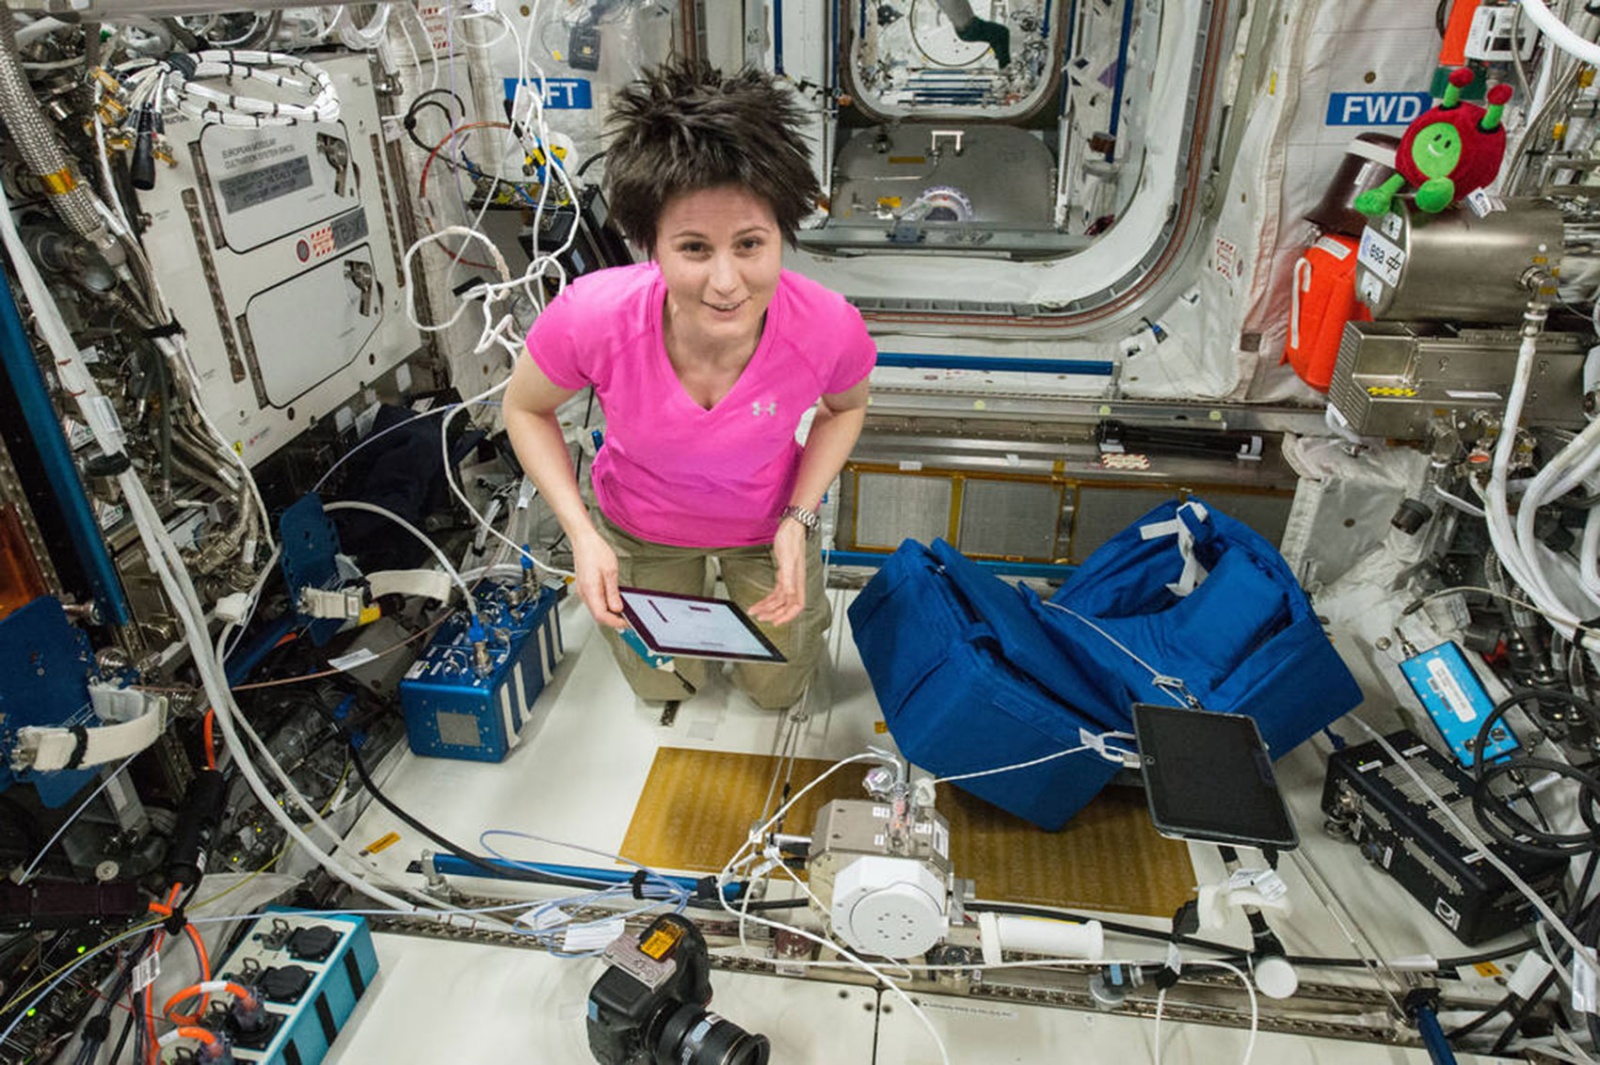 ESA astronaut Samantha Cristoforetti worked with iPad during a recent mission on the International Space Station. NASA wants astronauts to start using smartwatches for some of their tasks.